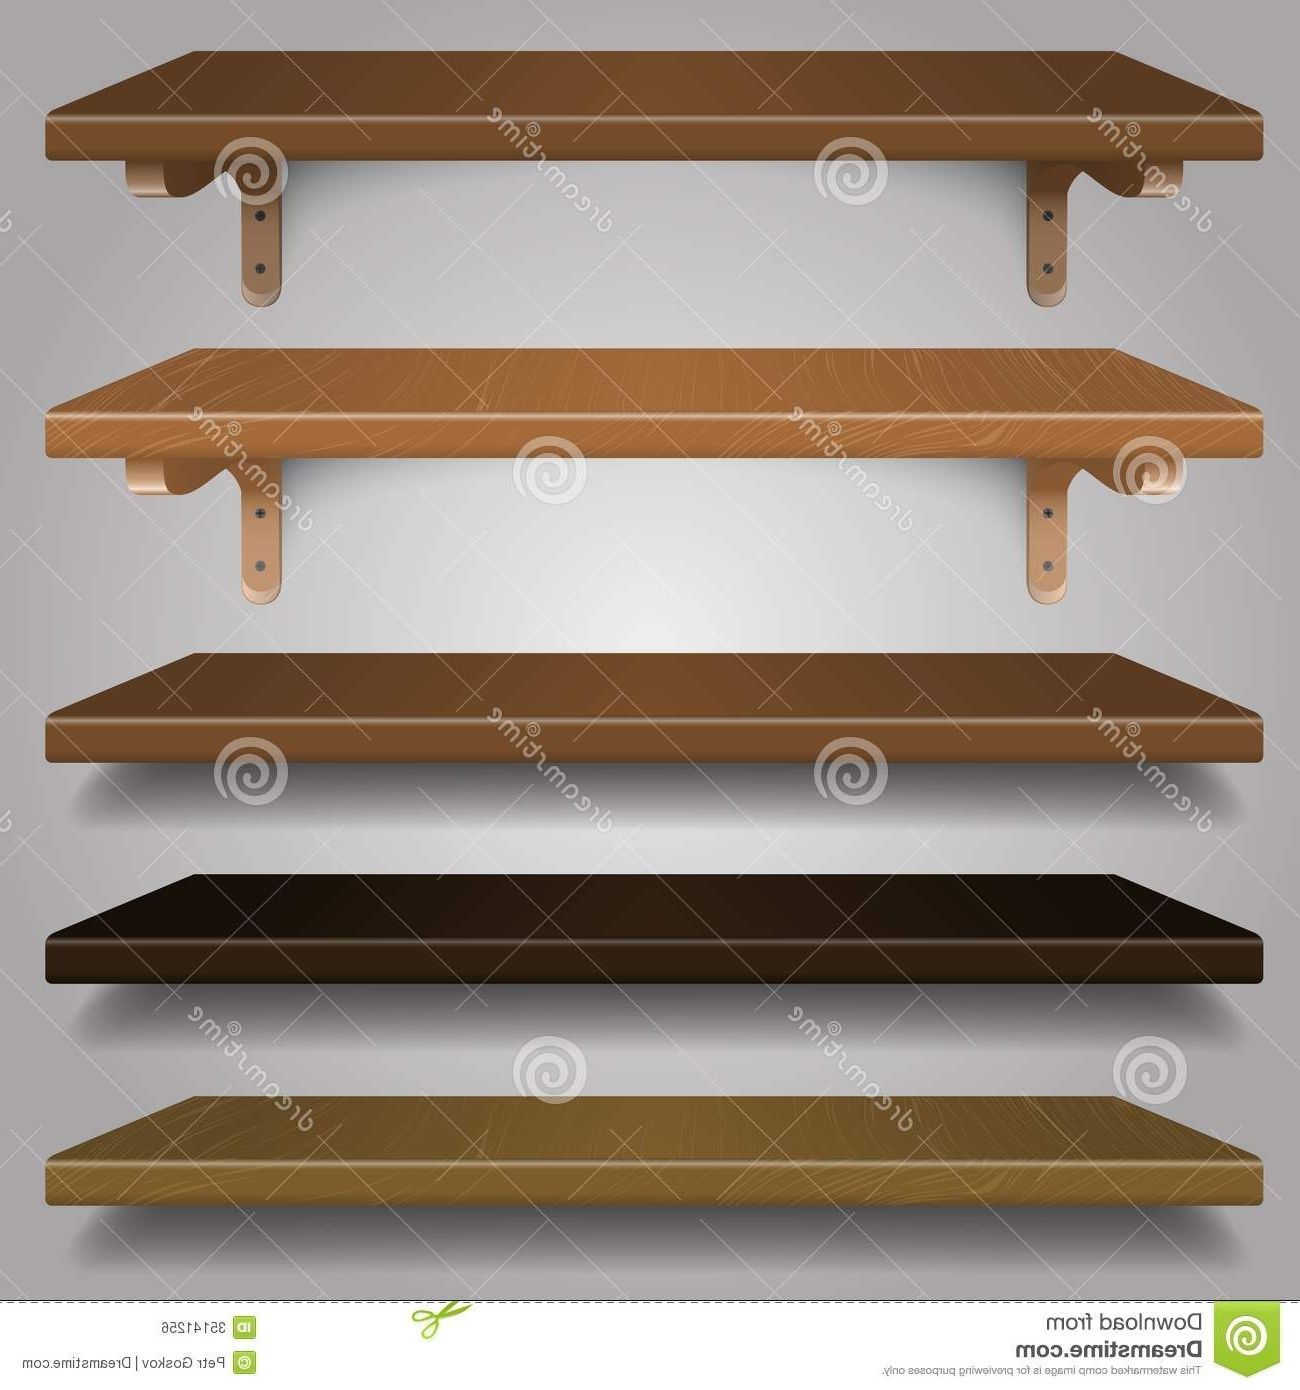 Most Up To Date Ingenious Inspiration Ideas Wood For Shelves Stylish Design Vector Intended For Wood For Shelves (View 5 of 15)